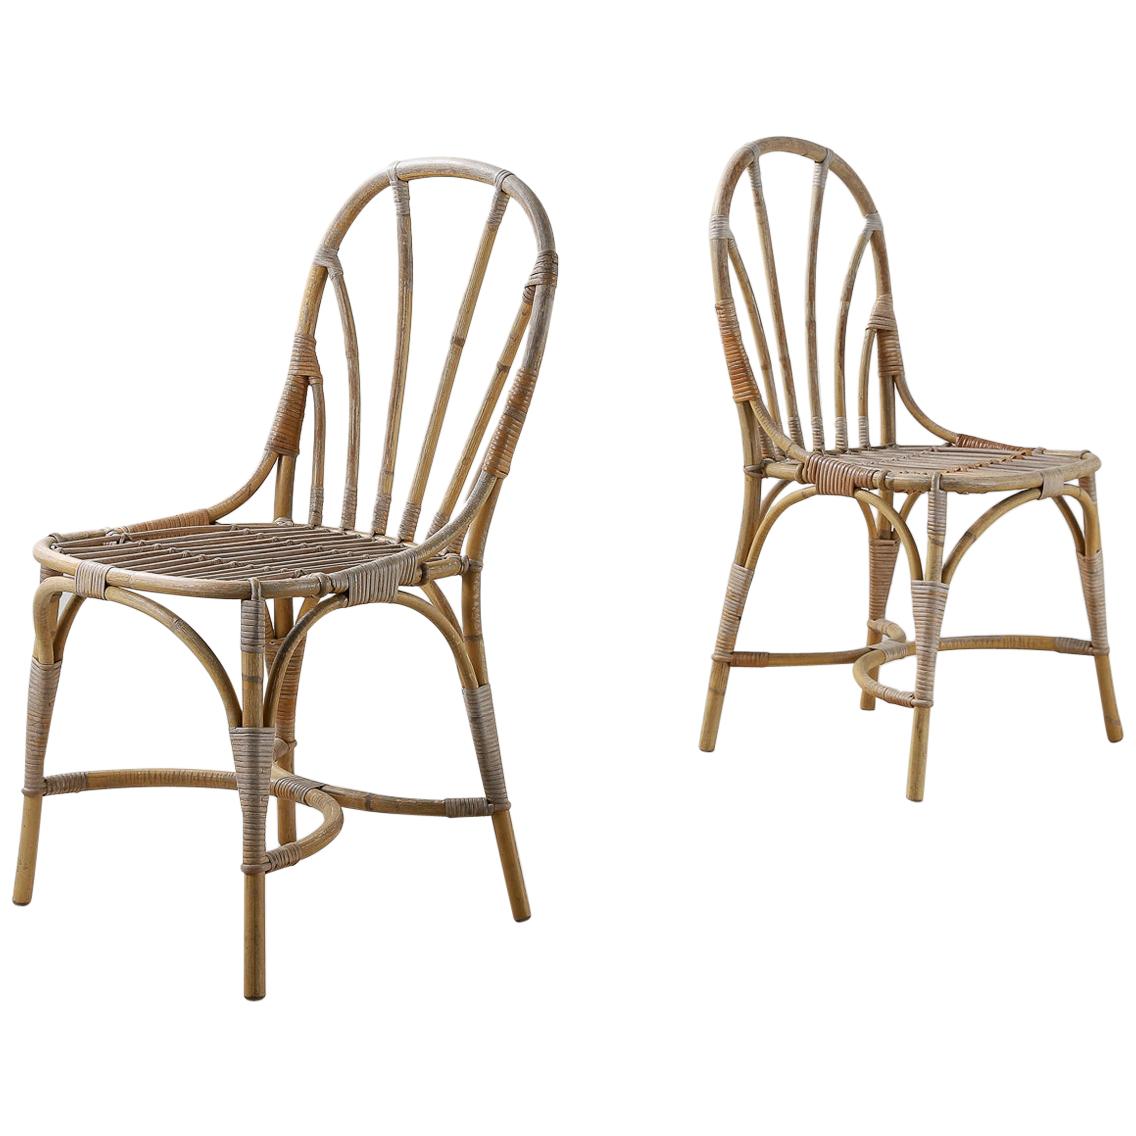 Pair of Bamboo & Rattan Chairs by Josef Frank